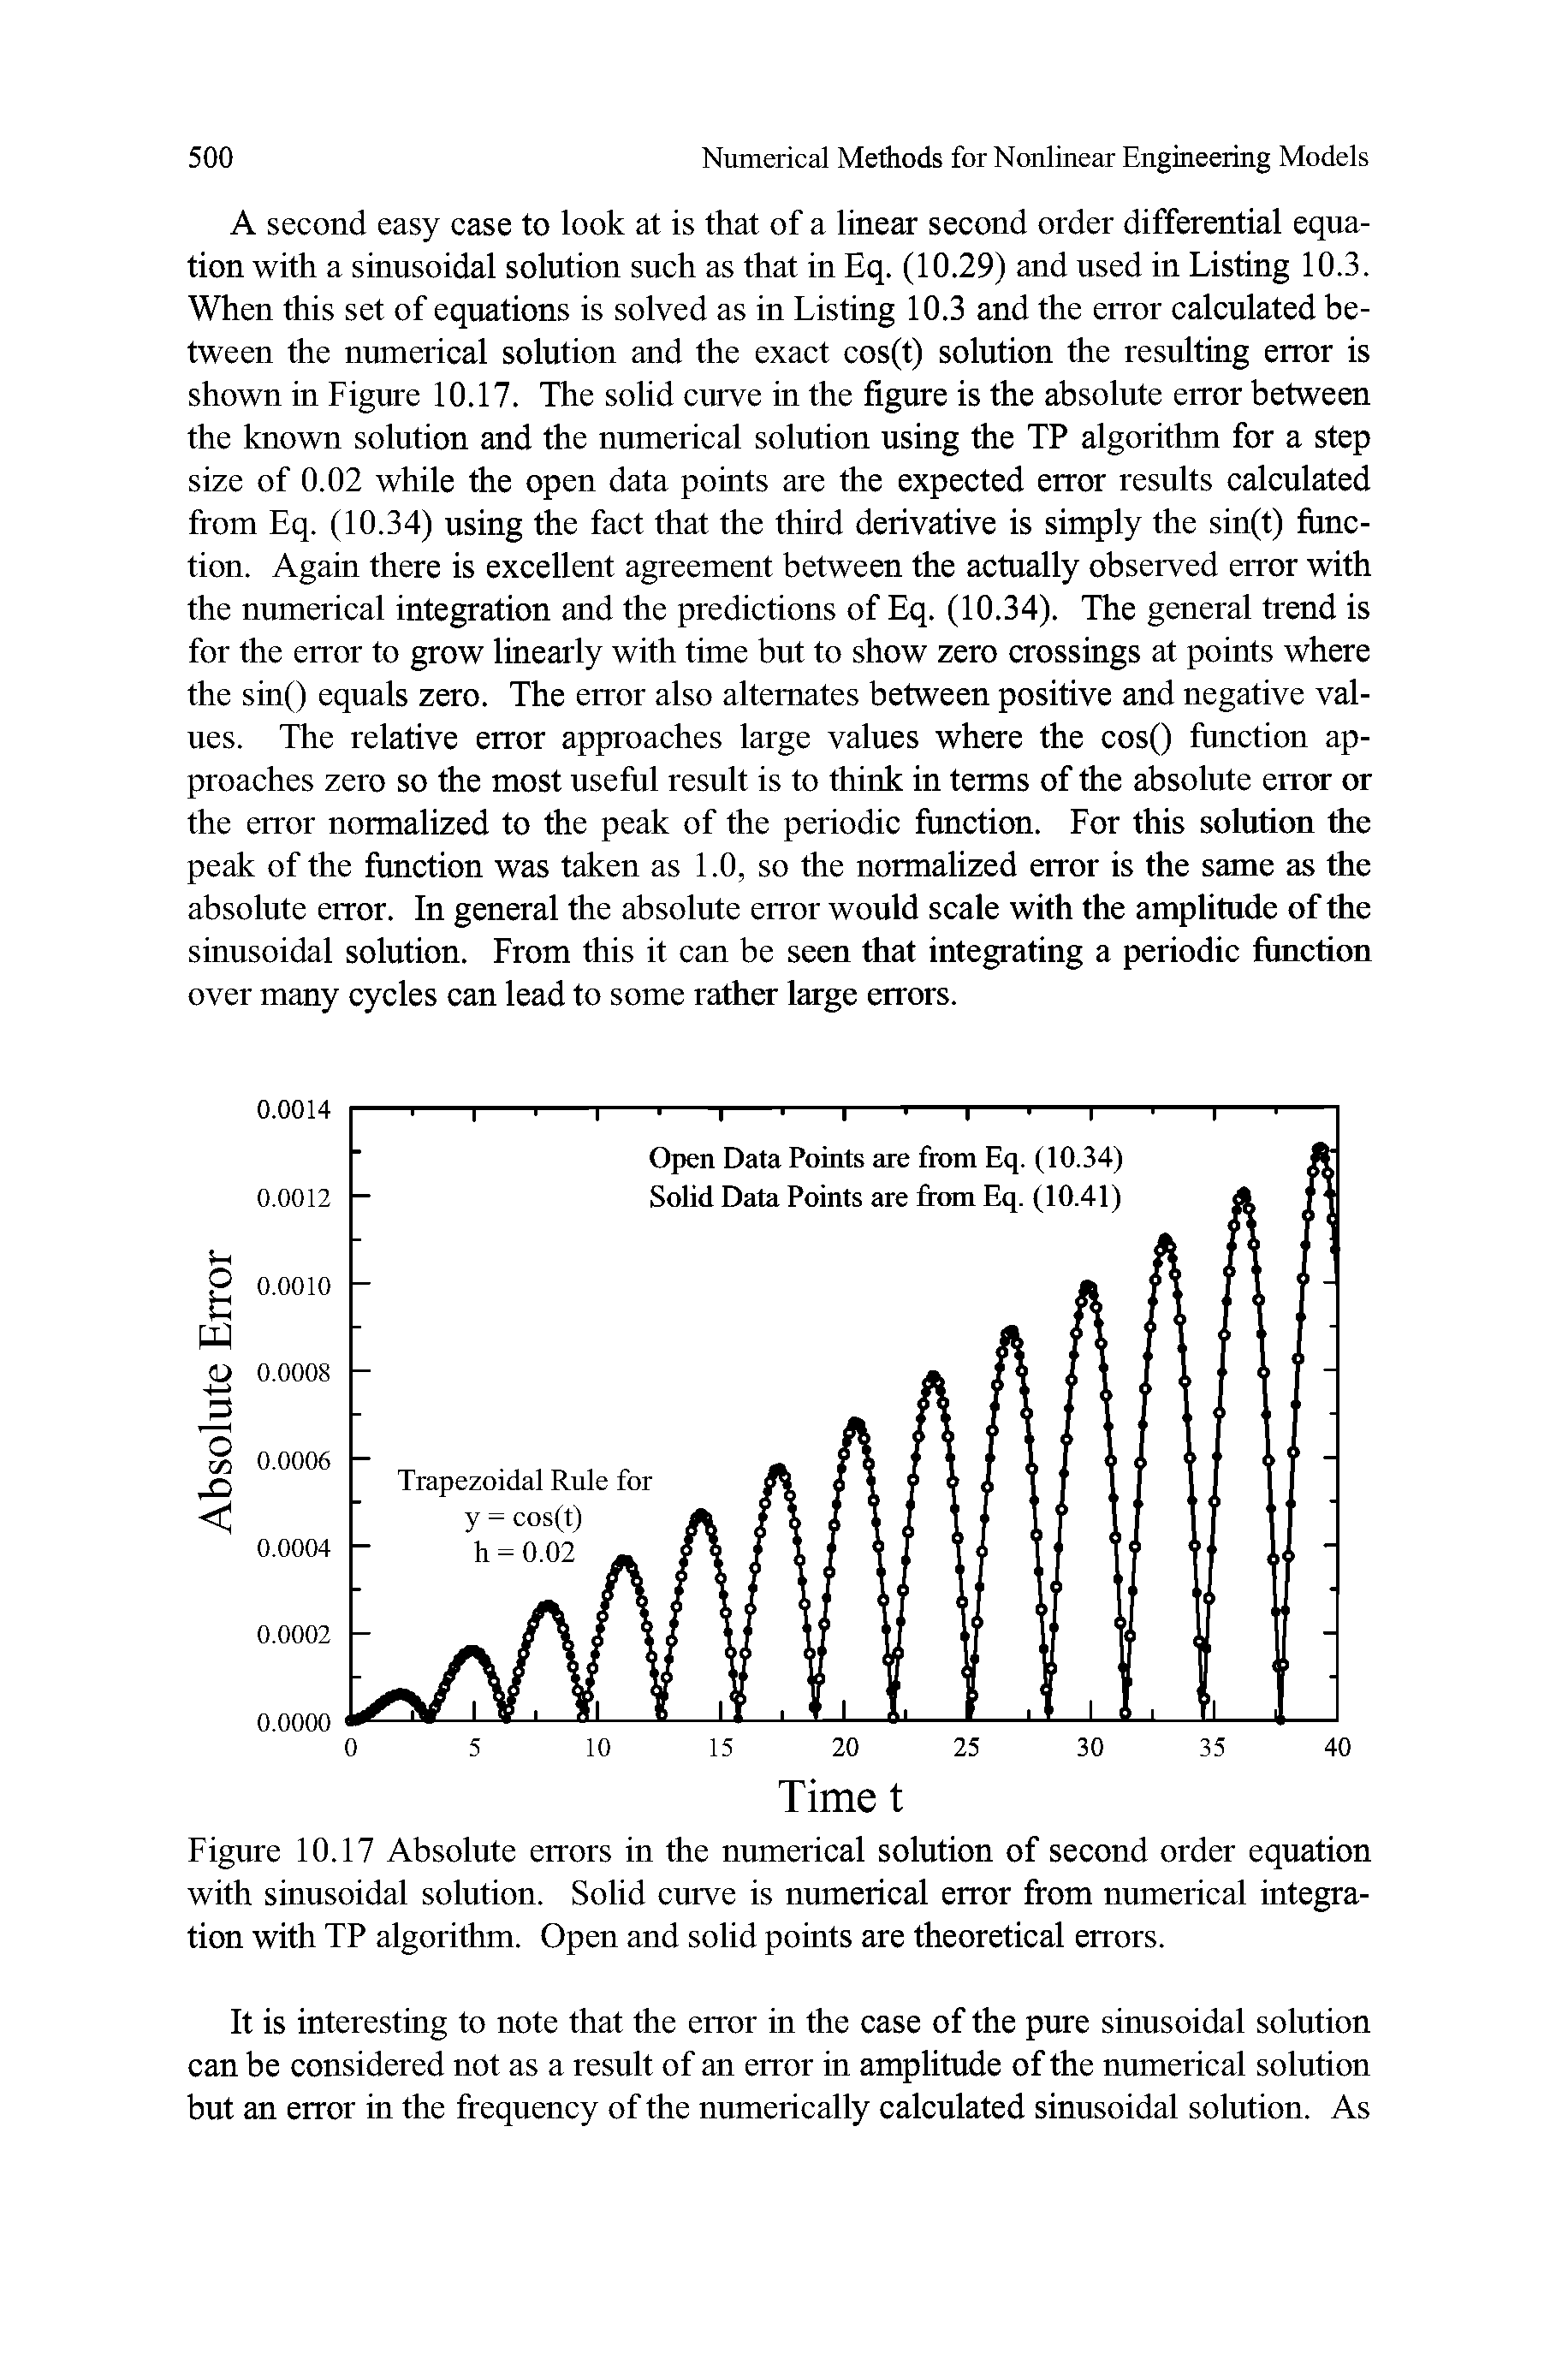 Figure 10.17 Absolute errors in the numerical solution of second order equation with sinusoidal solution. Solid curve is numerical error from numerical integration with TP algorithm. Open and solid points are theoretical errors.